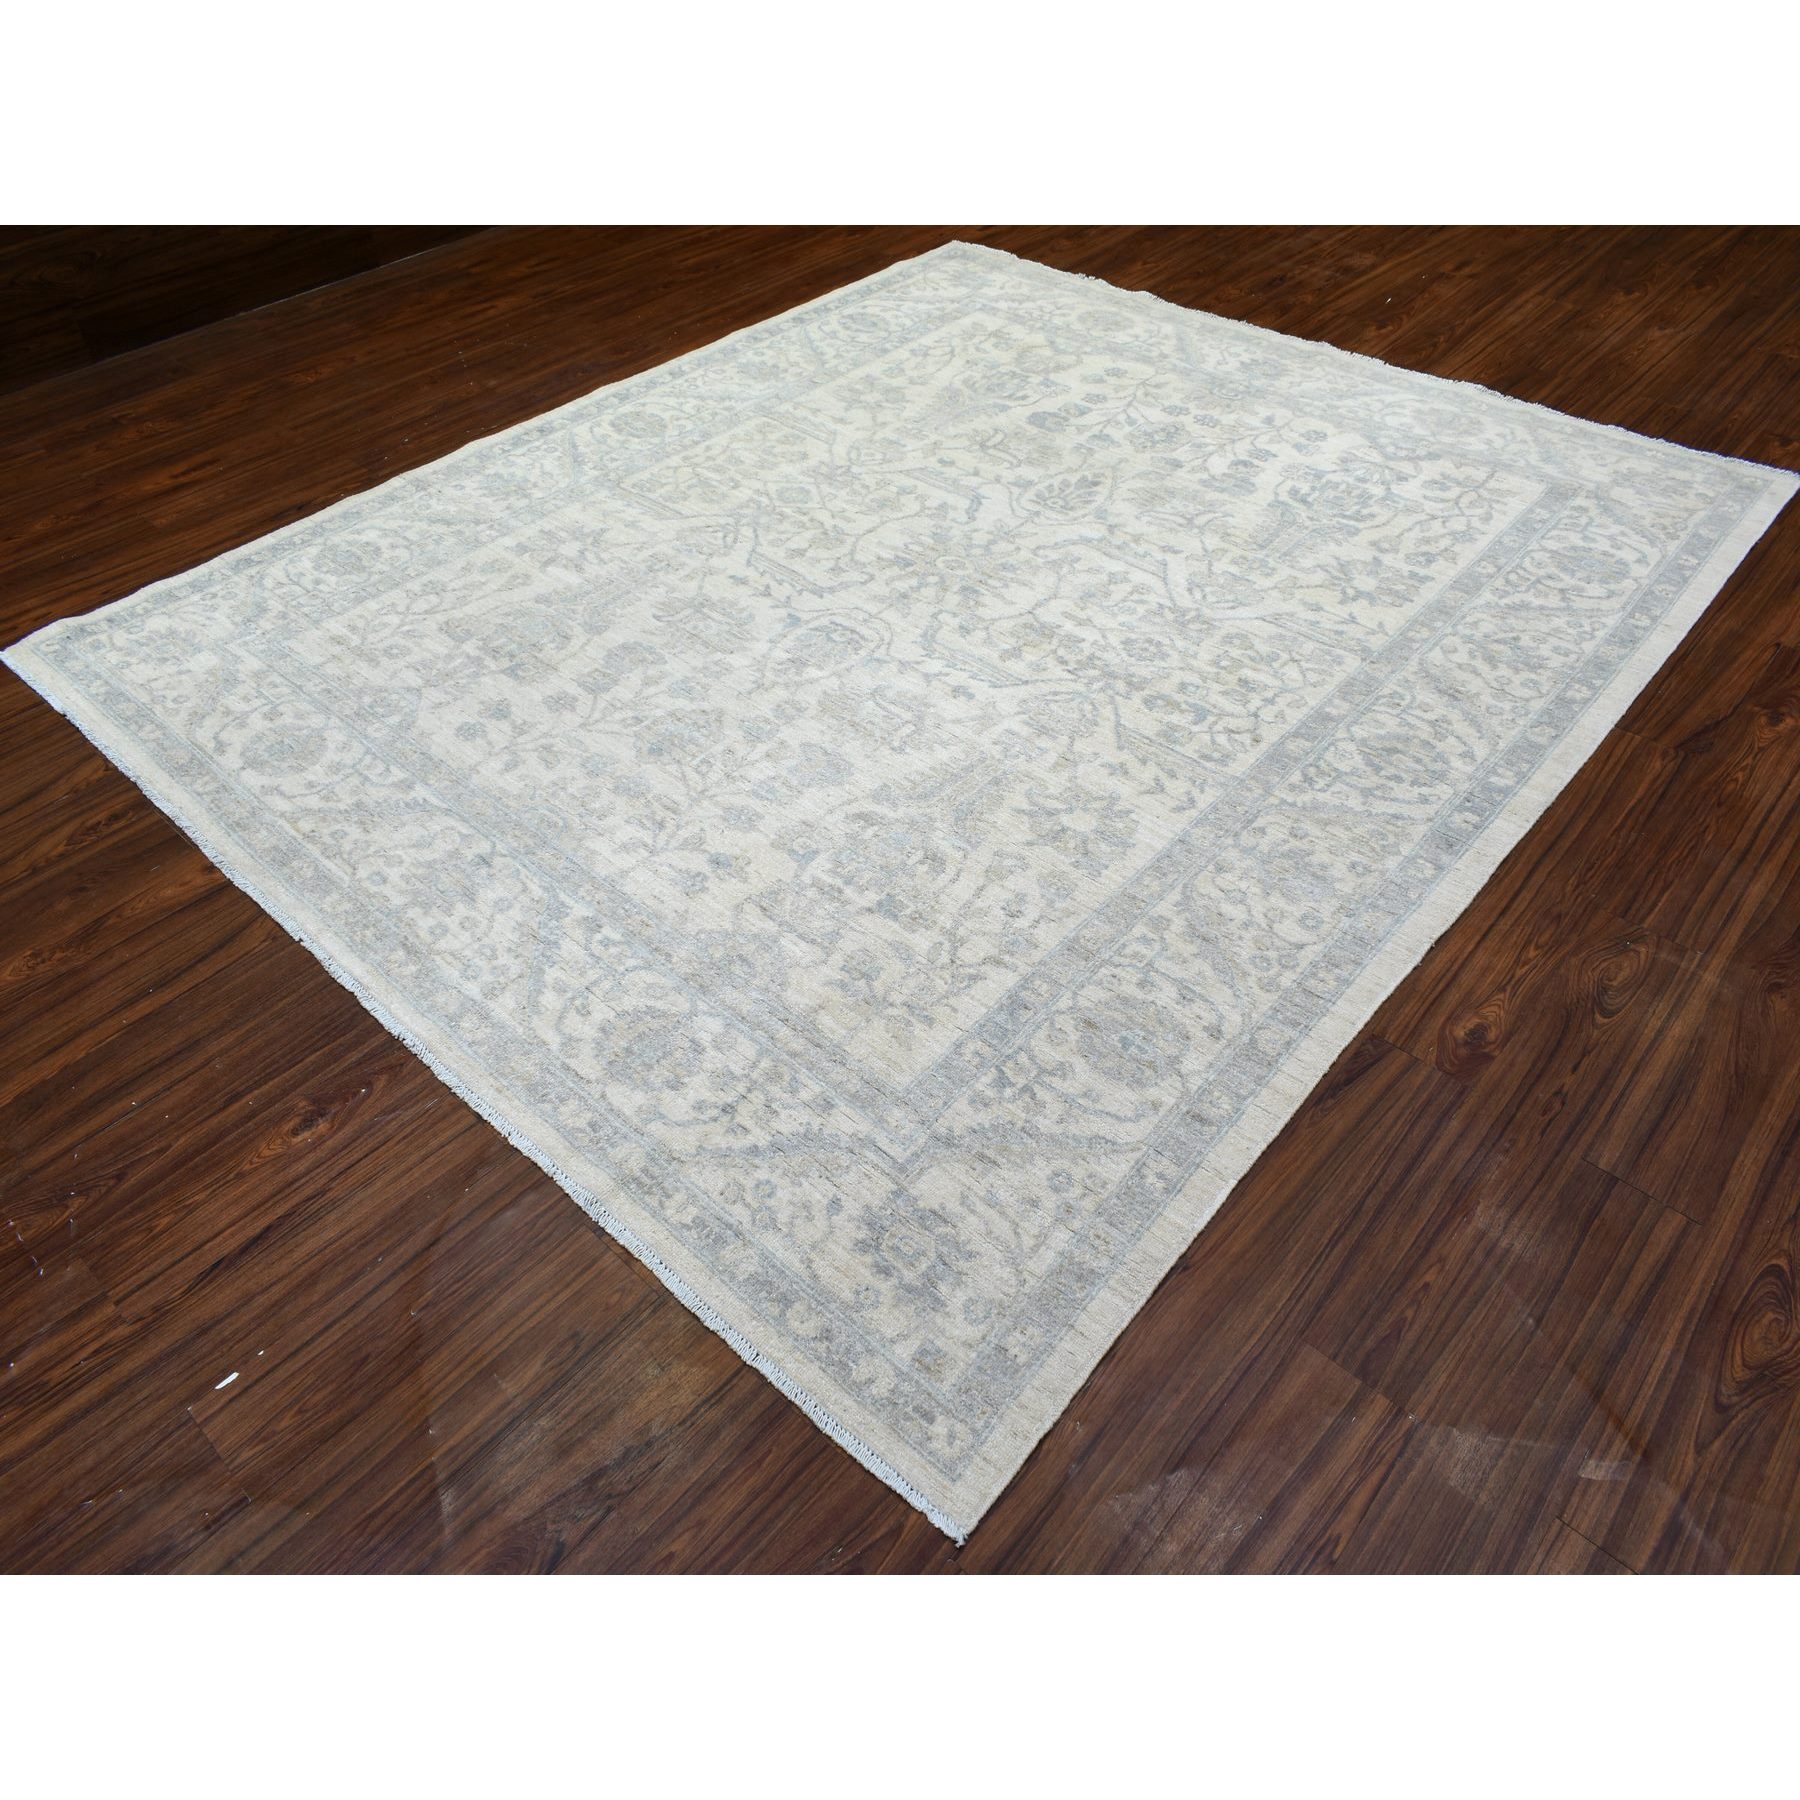 8'4"x9'7" Ivory, White Wash Peshawar with All Over Design, Natural Dyes Pure Wool Hand Woven, Oriental Rug 